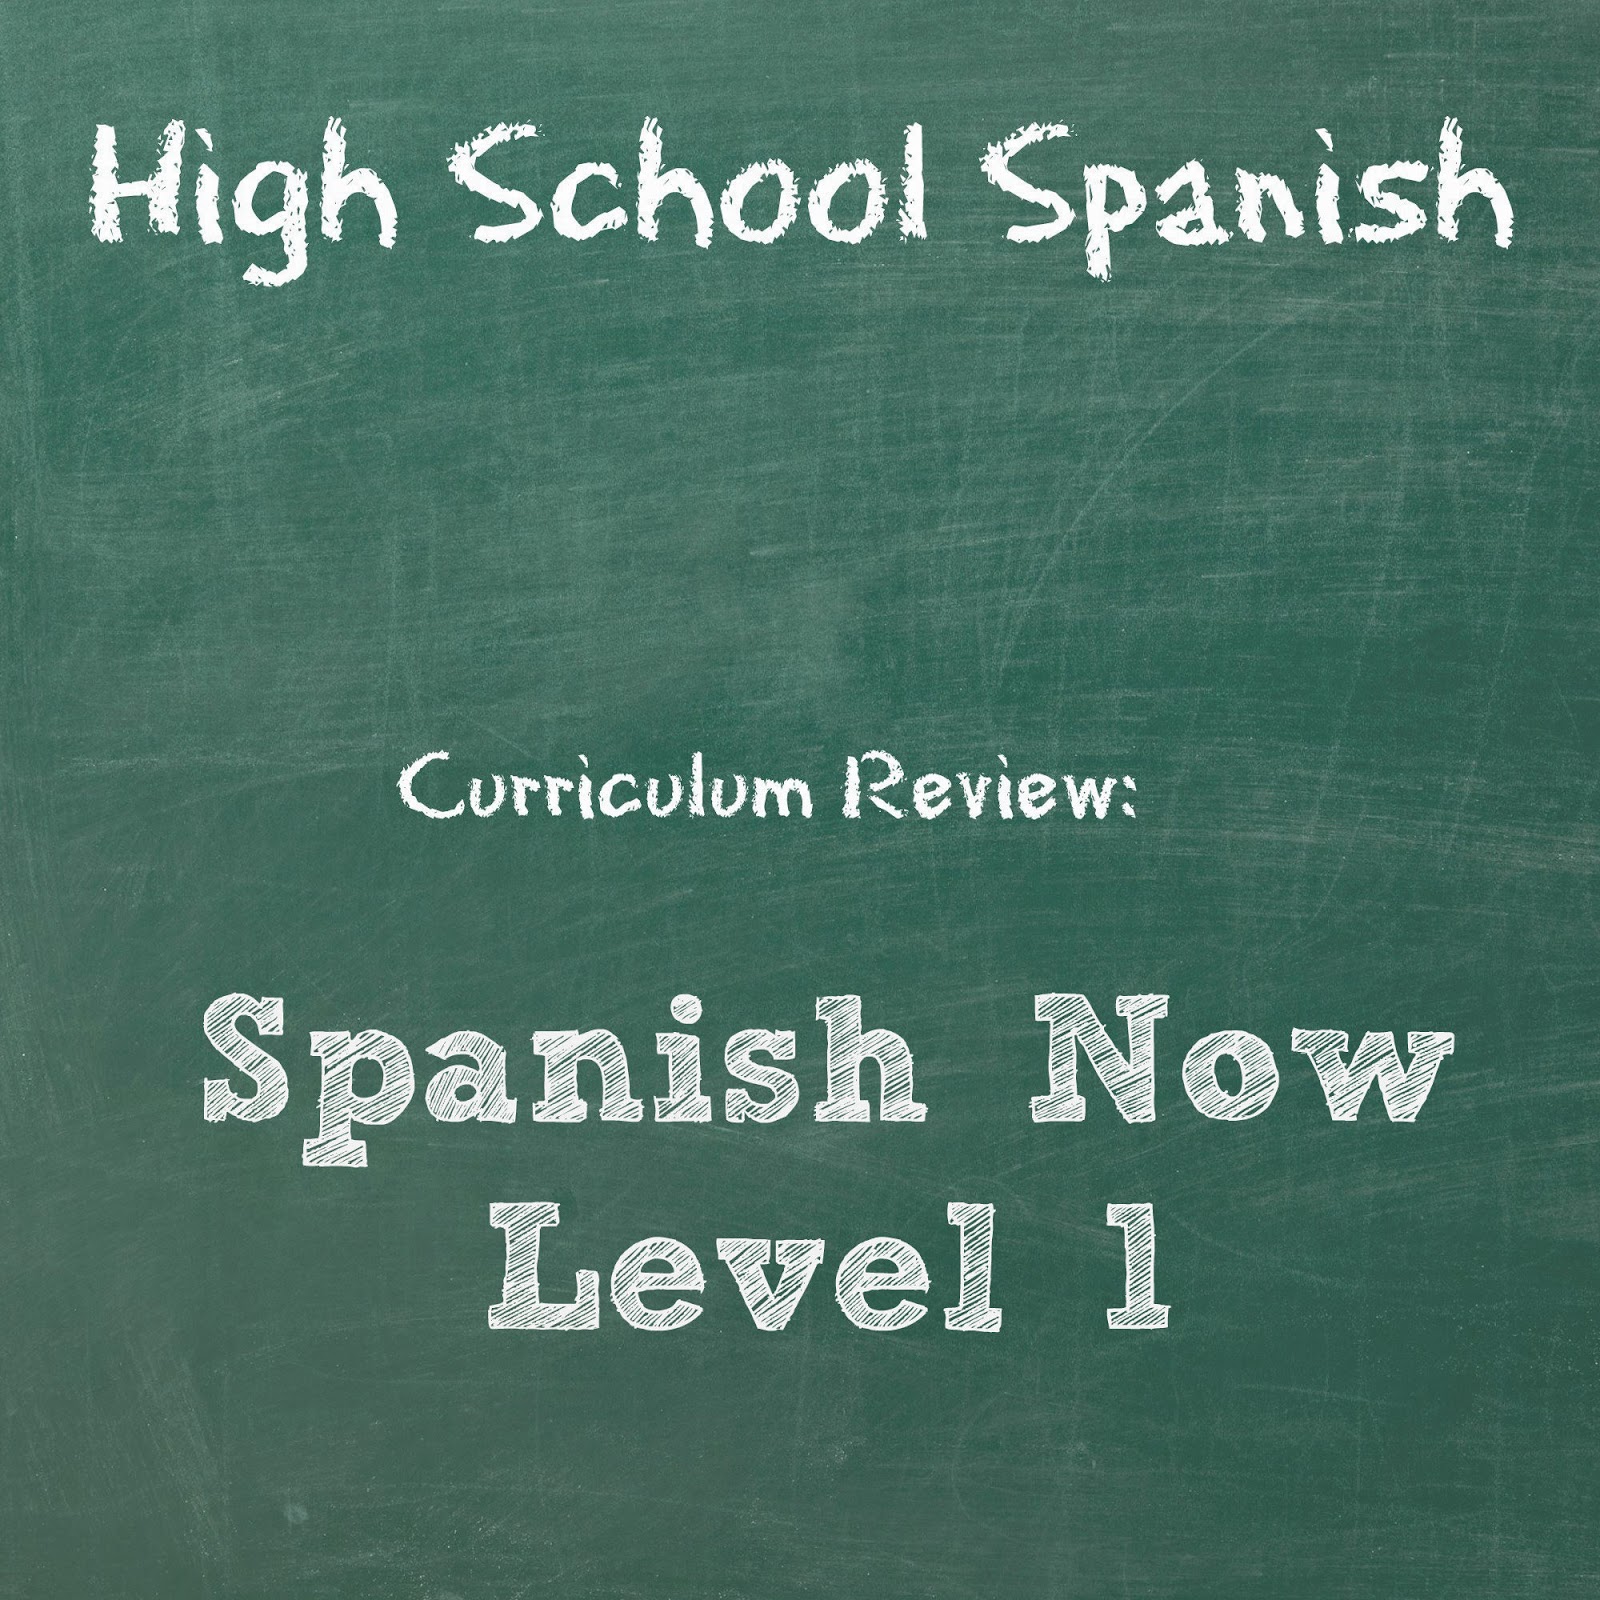 Spanish Now! Level 1 // My Review